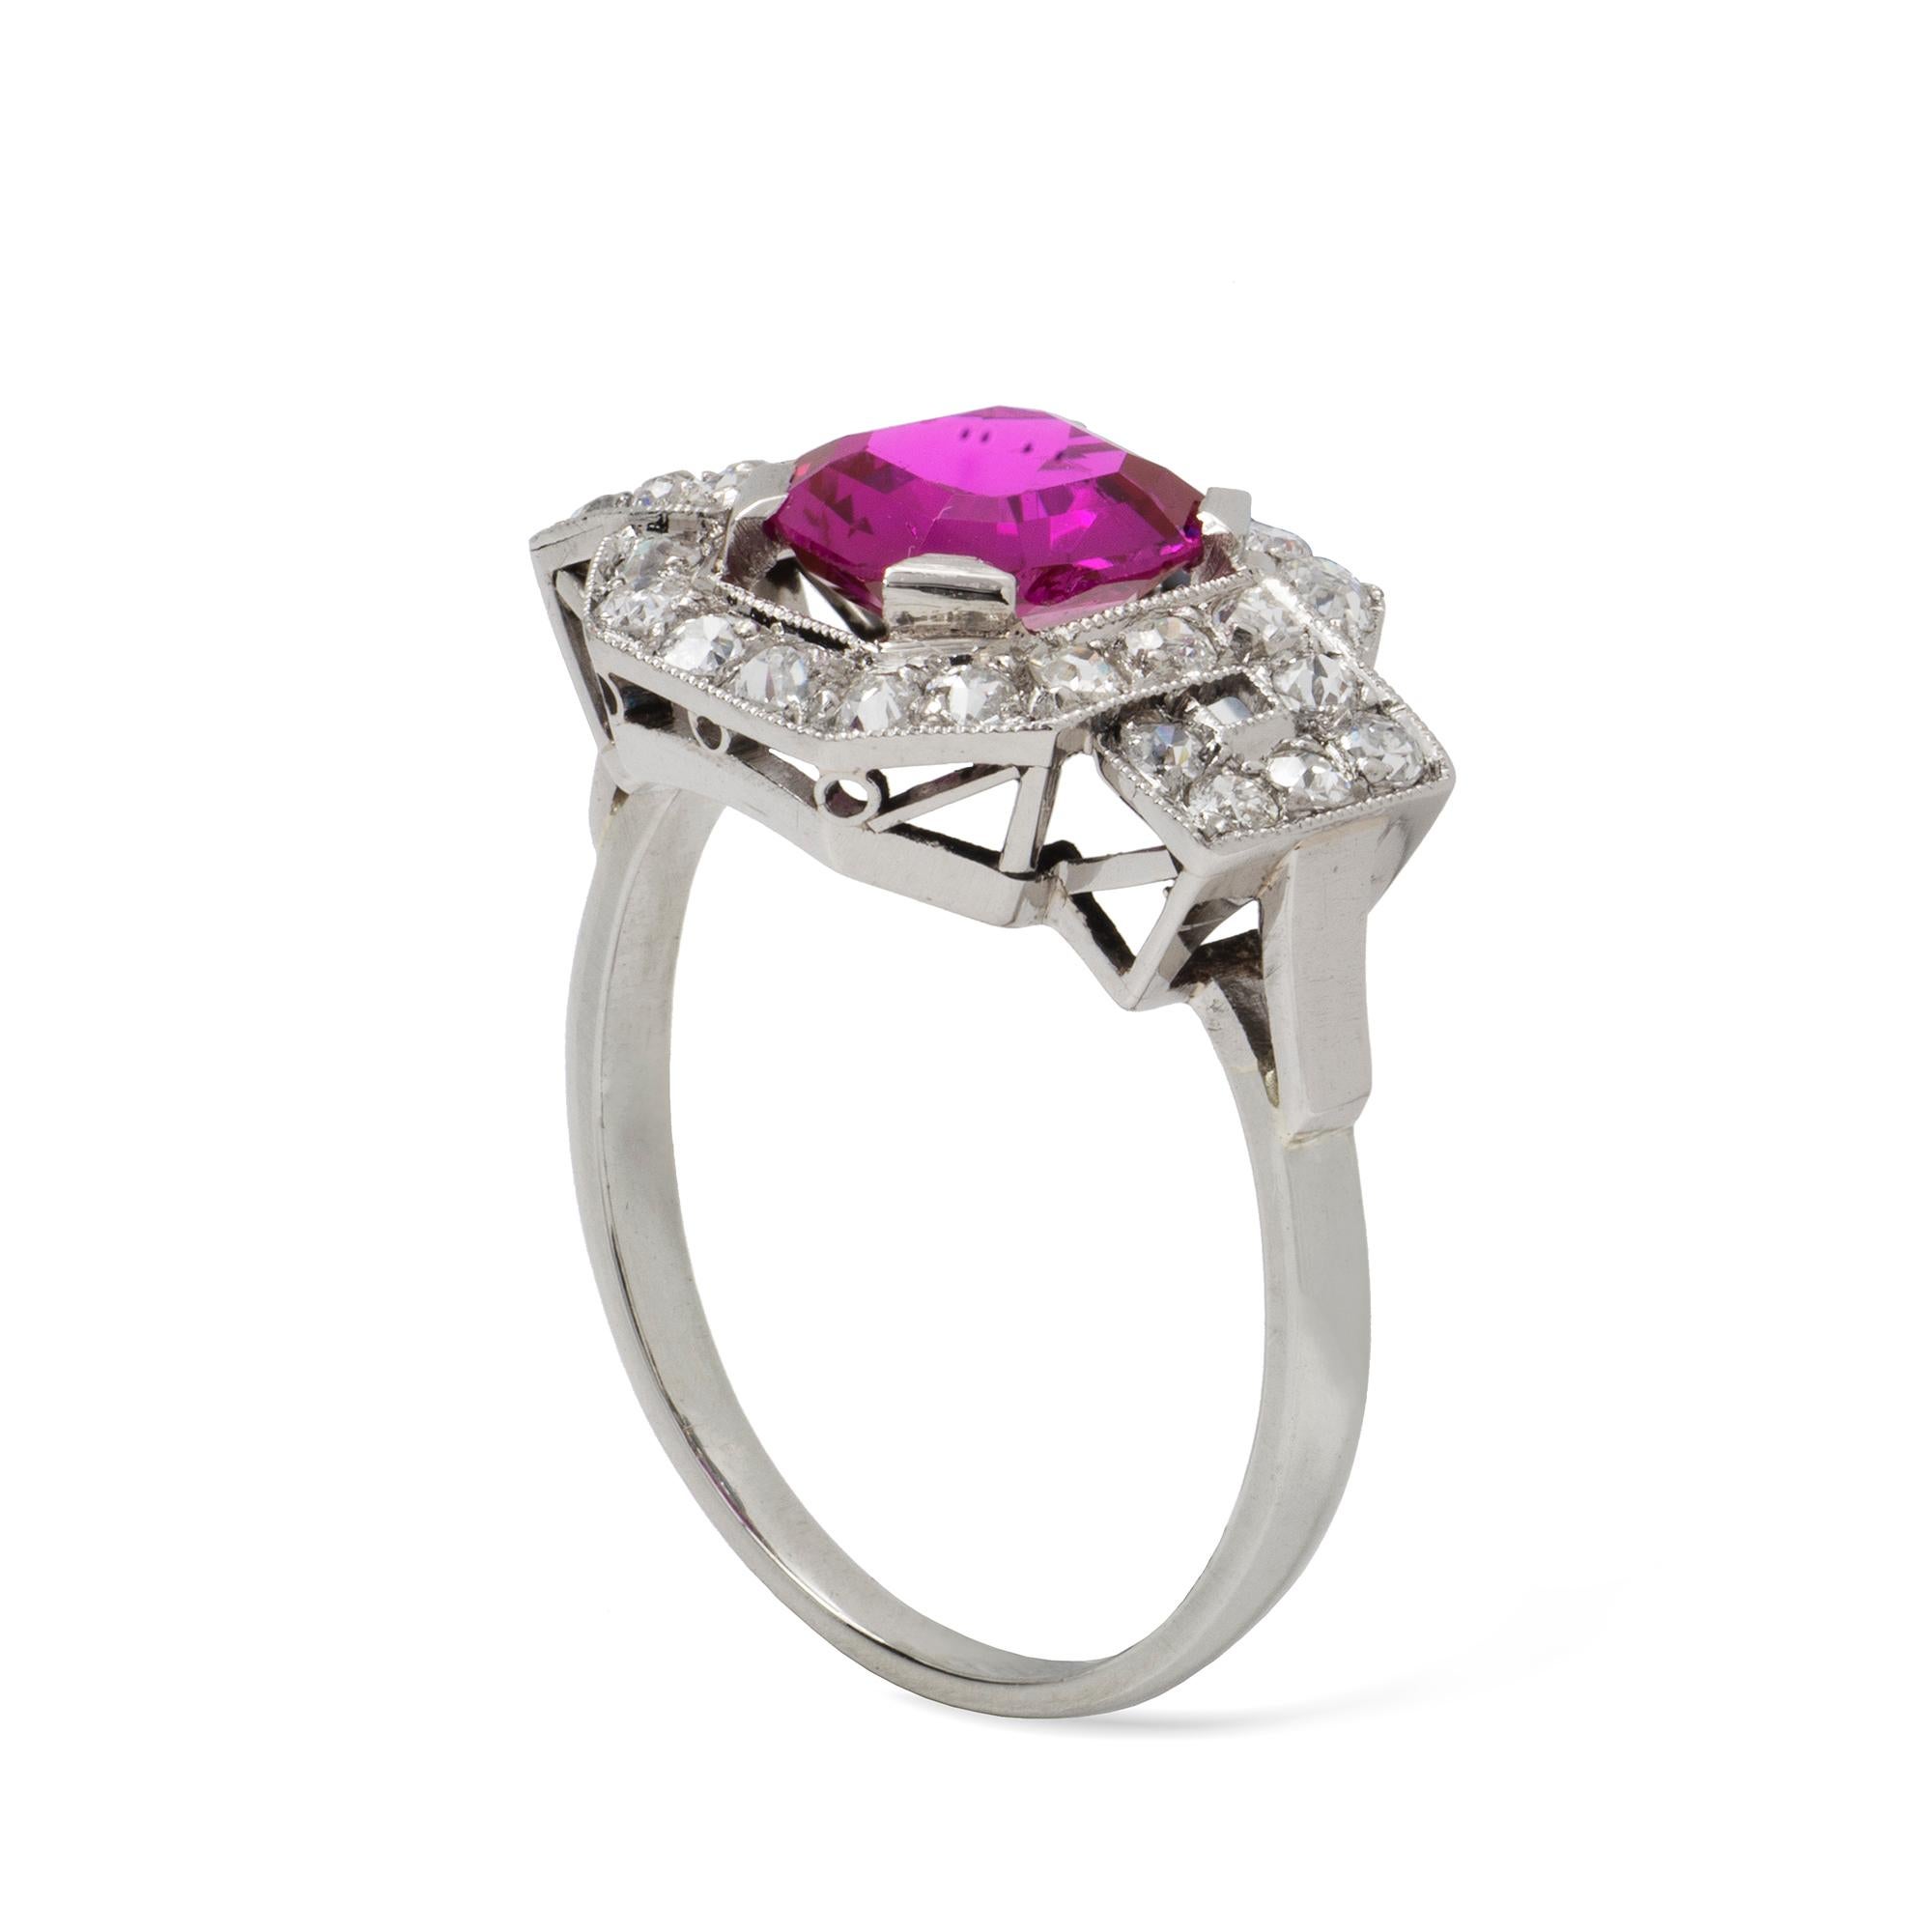 An Art-Deco ruby and diamond ring, the octagonal-cut Burmese ruby weighing 1.90 carats, surrounded by an openwork old cut and swiss-cut diamond-set frame, the diamonds estimated to weigh approximately 0.85 carats, all set in platinum,  circa 1920,